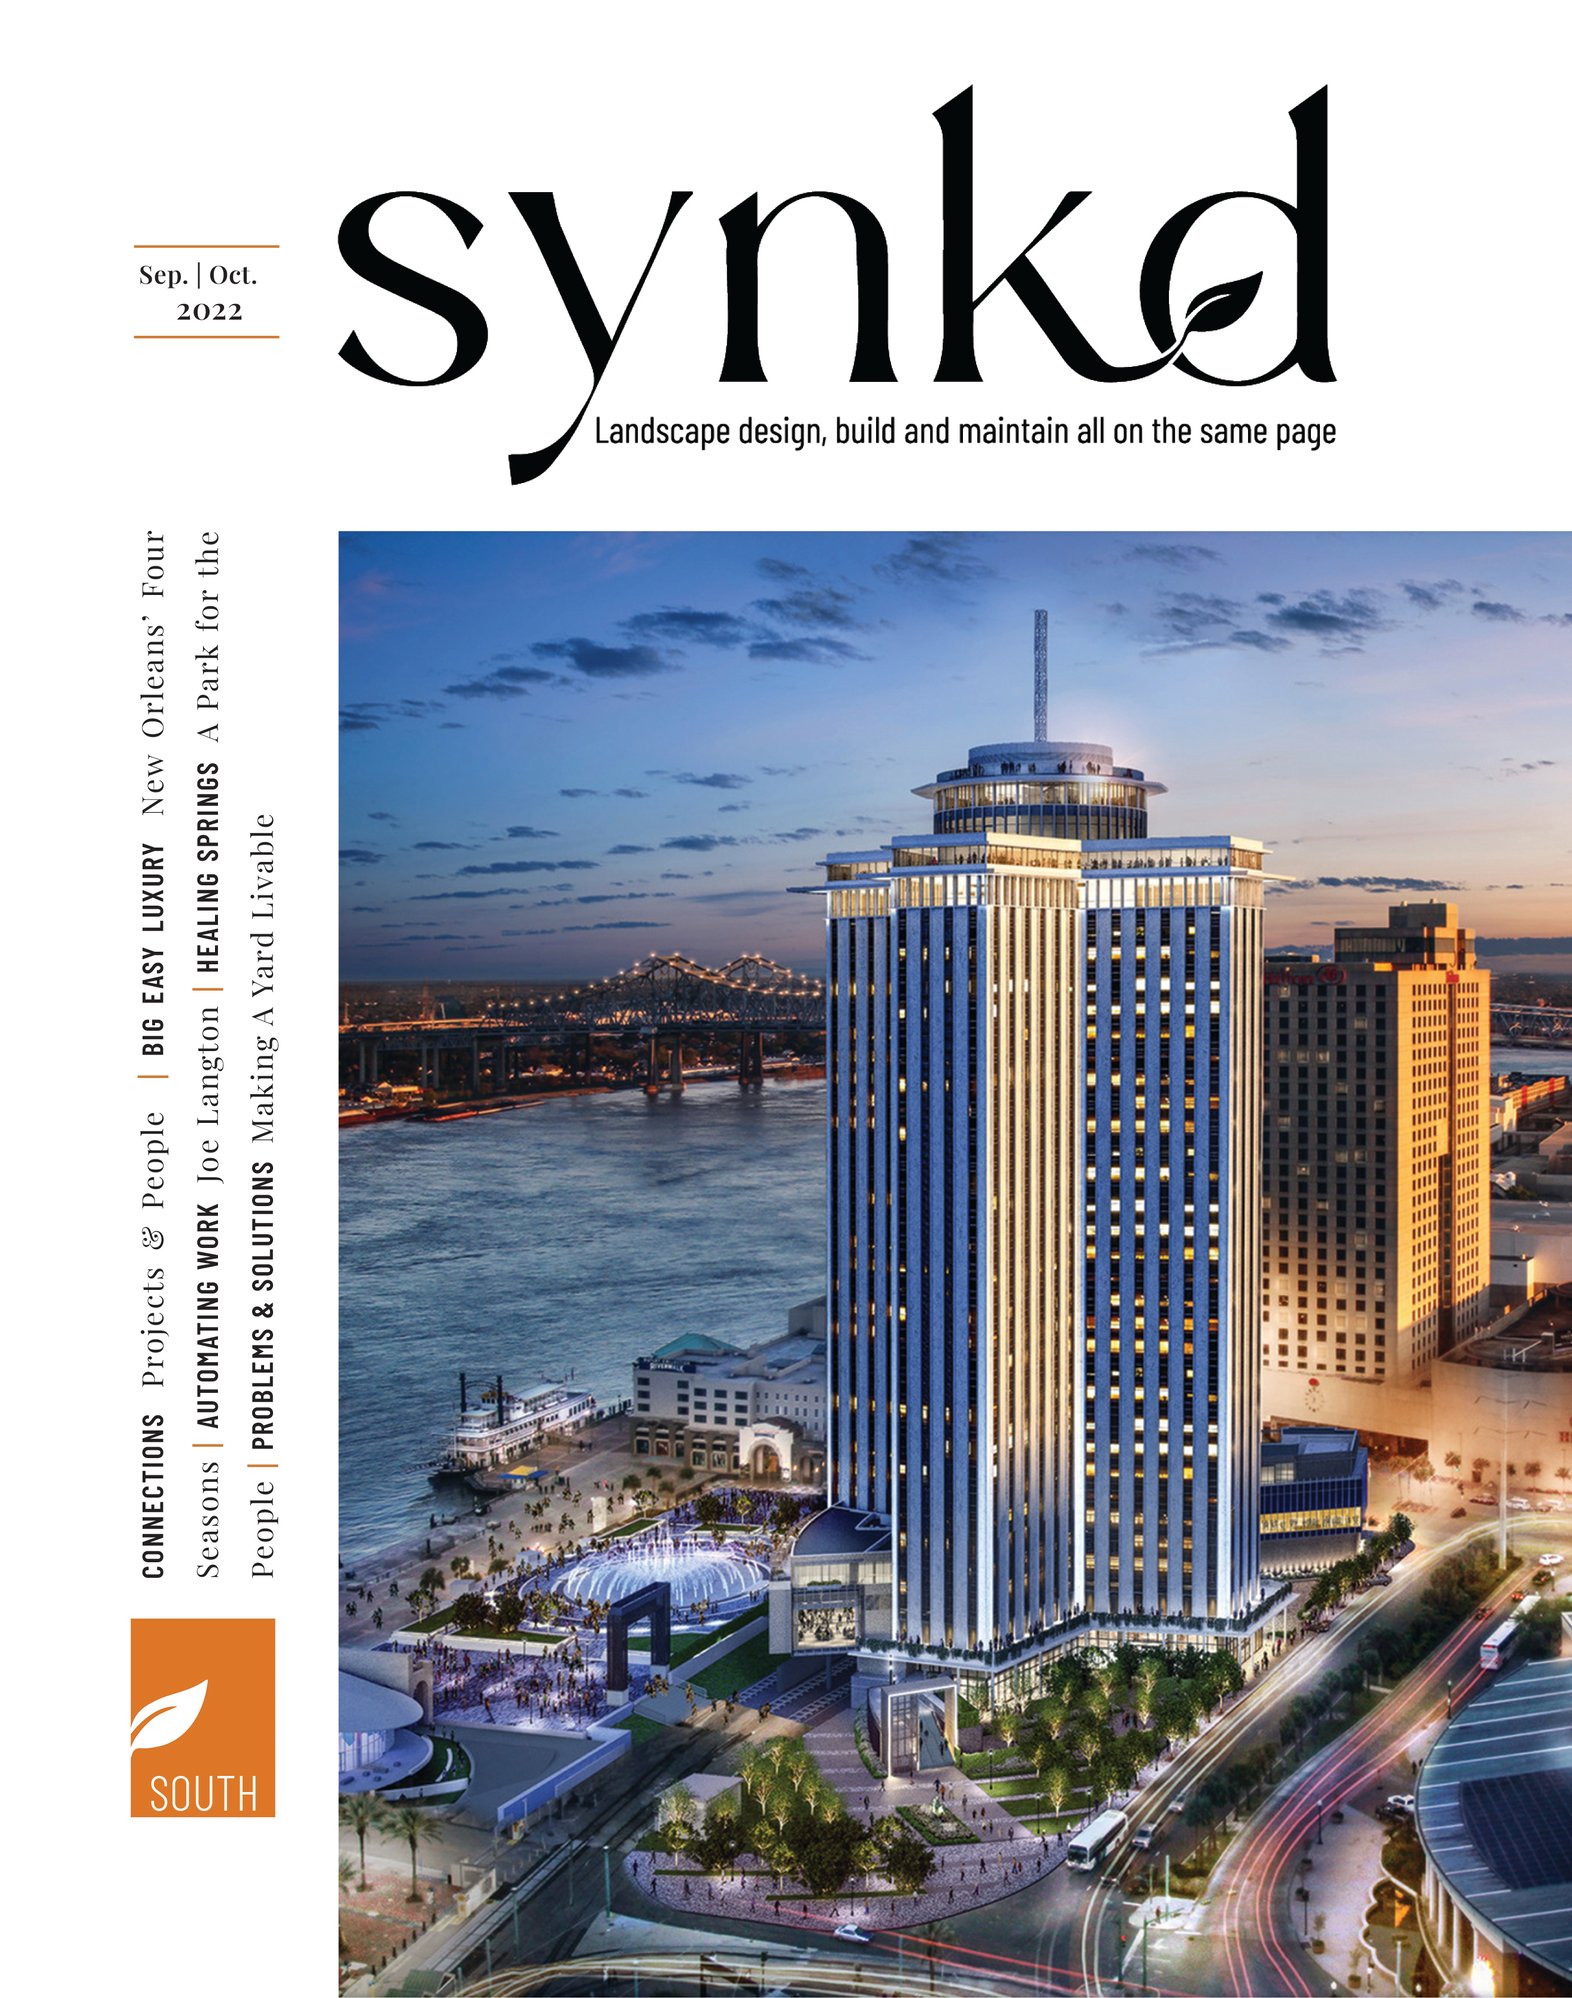 The first publication of the newly rebranded magazine, SYNKD, features the renovated Four Seasons hotel in New Orleans, Louisiana.